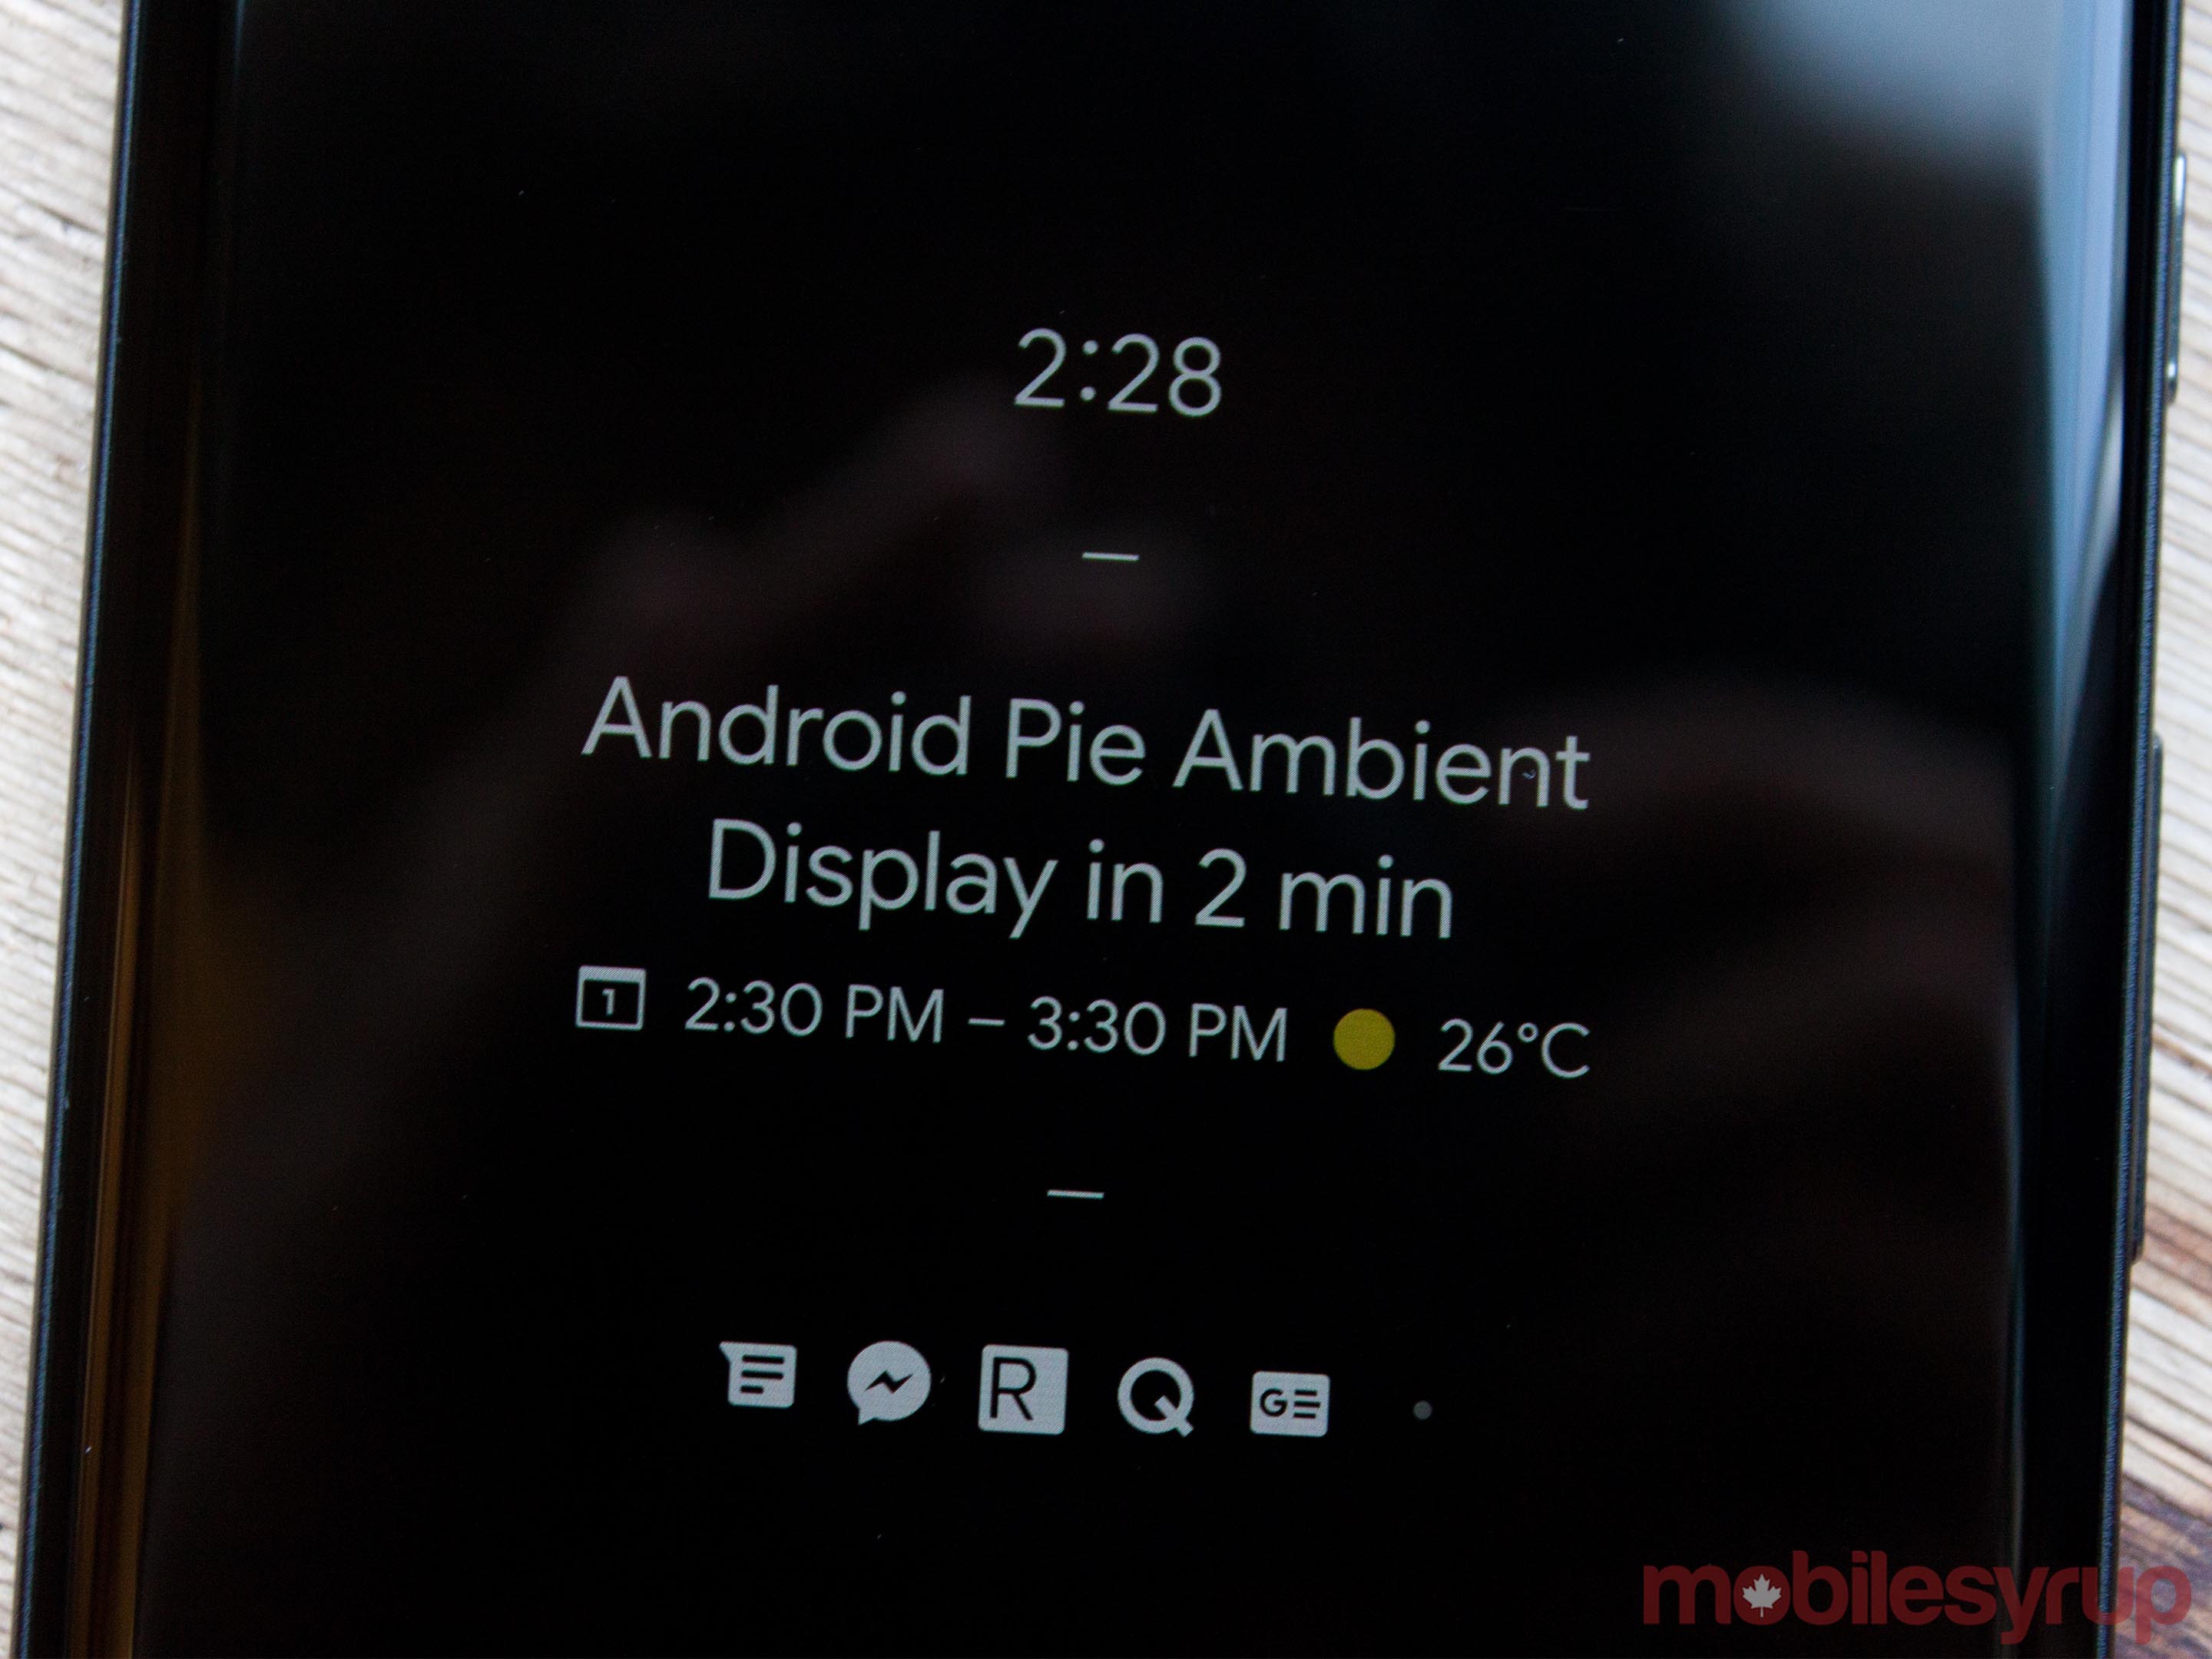 Android Pie Ambient Display